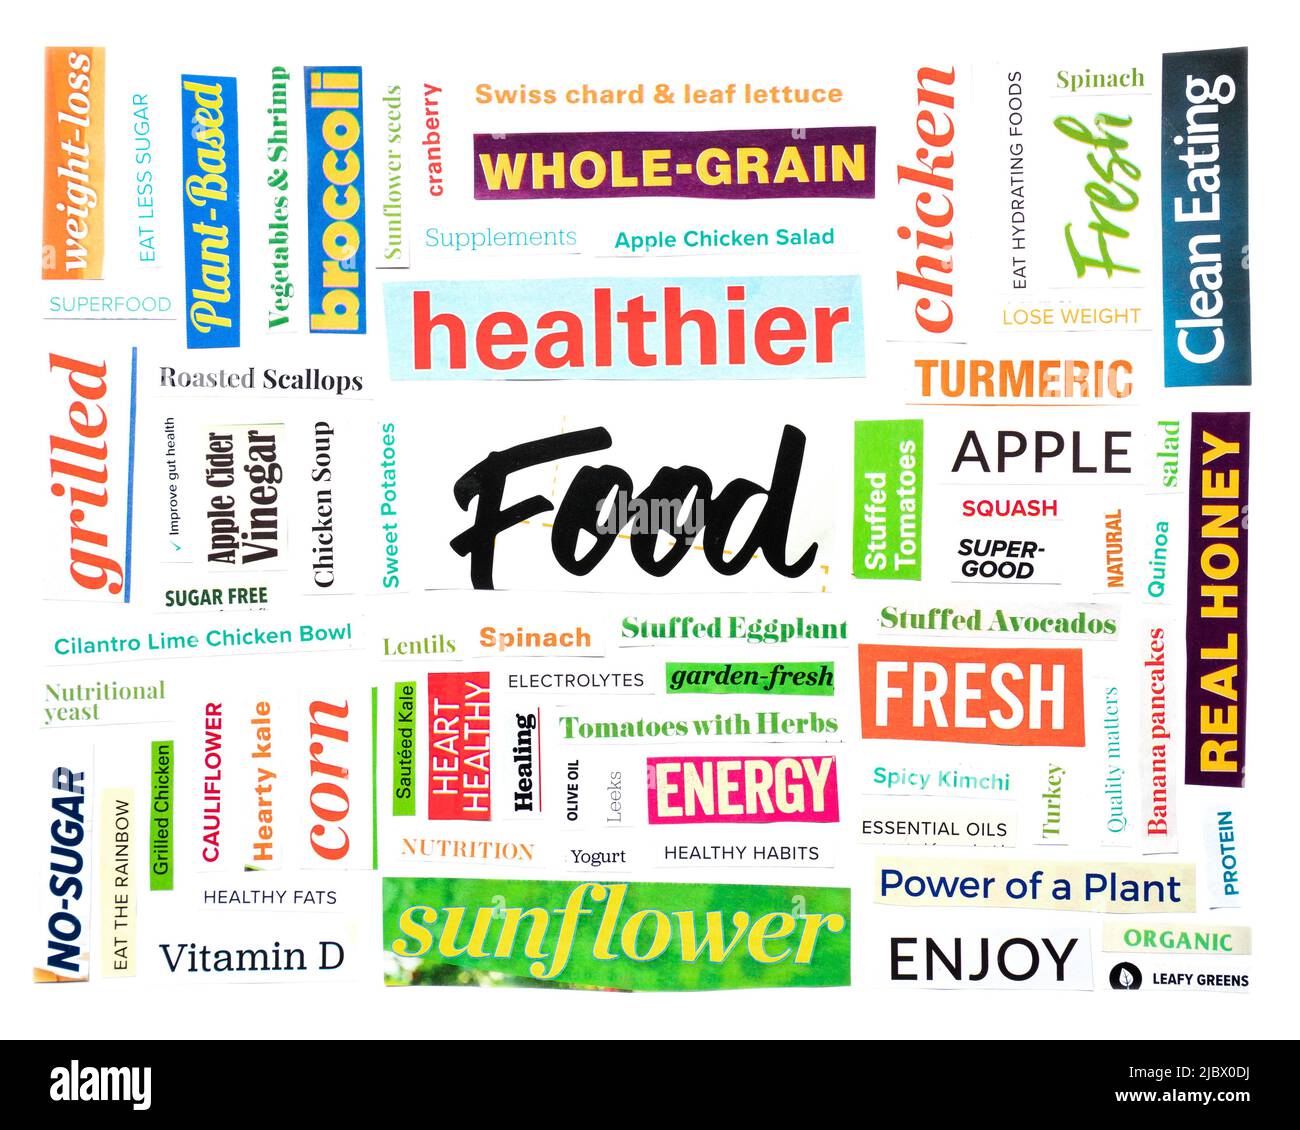 Healthy Food magazine cut out word cloud concept Stock Photo